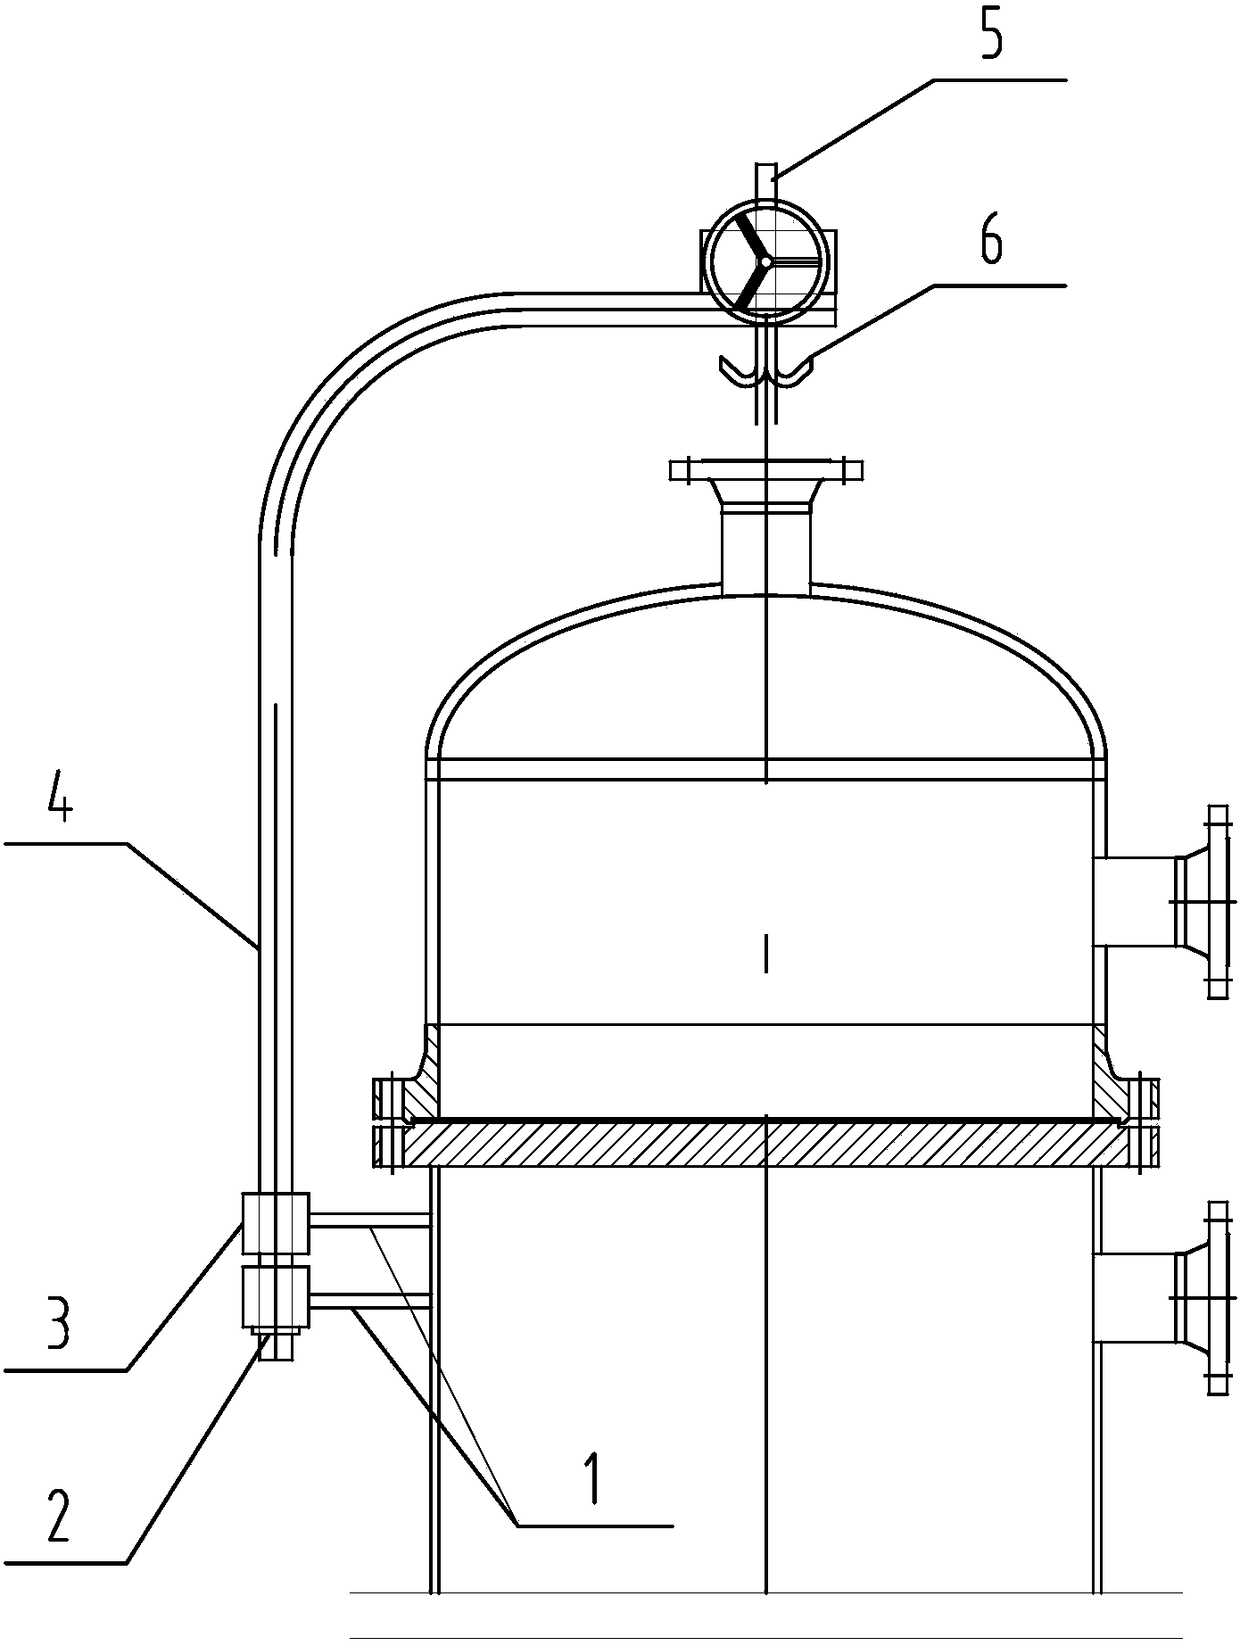 Simple and convenient vertical bent arm flange connection equipment dismounting and mounting device